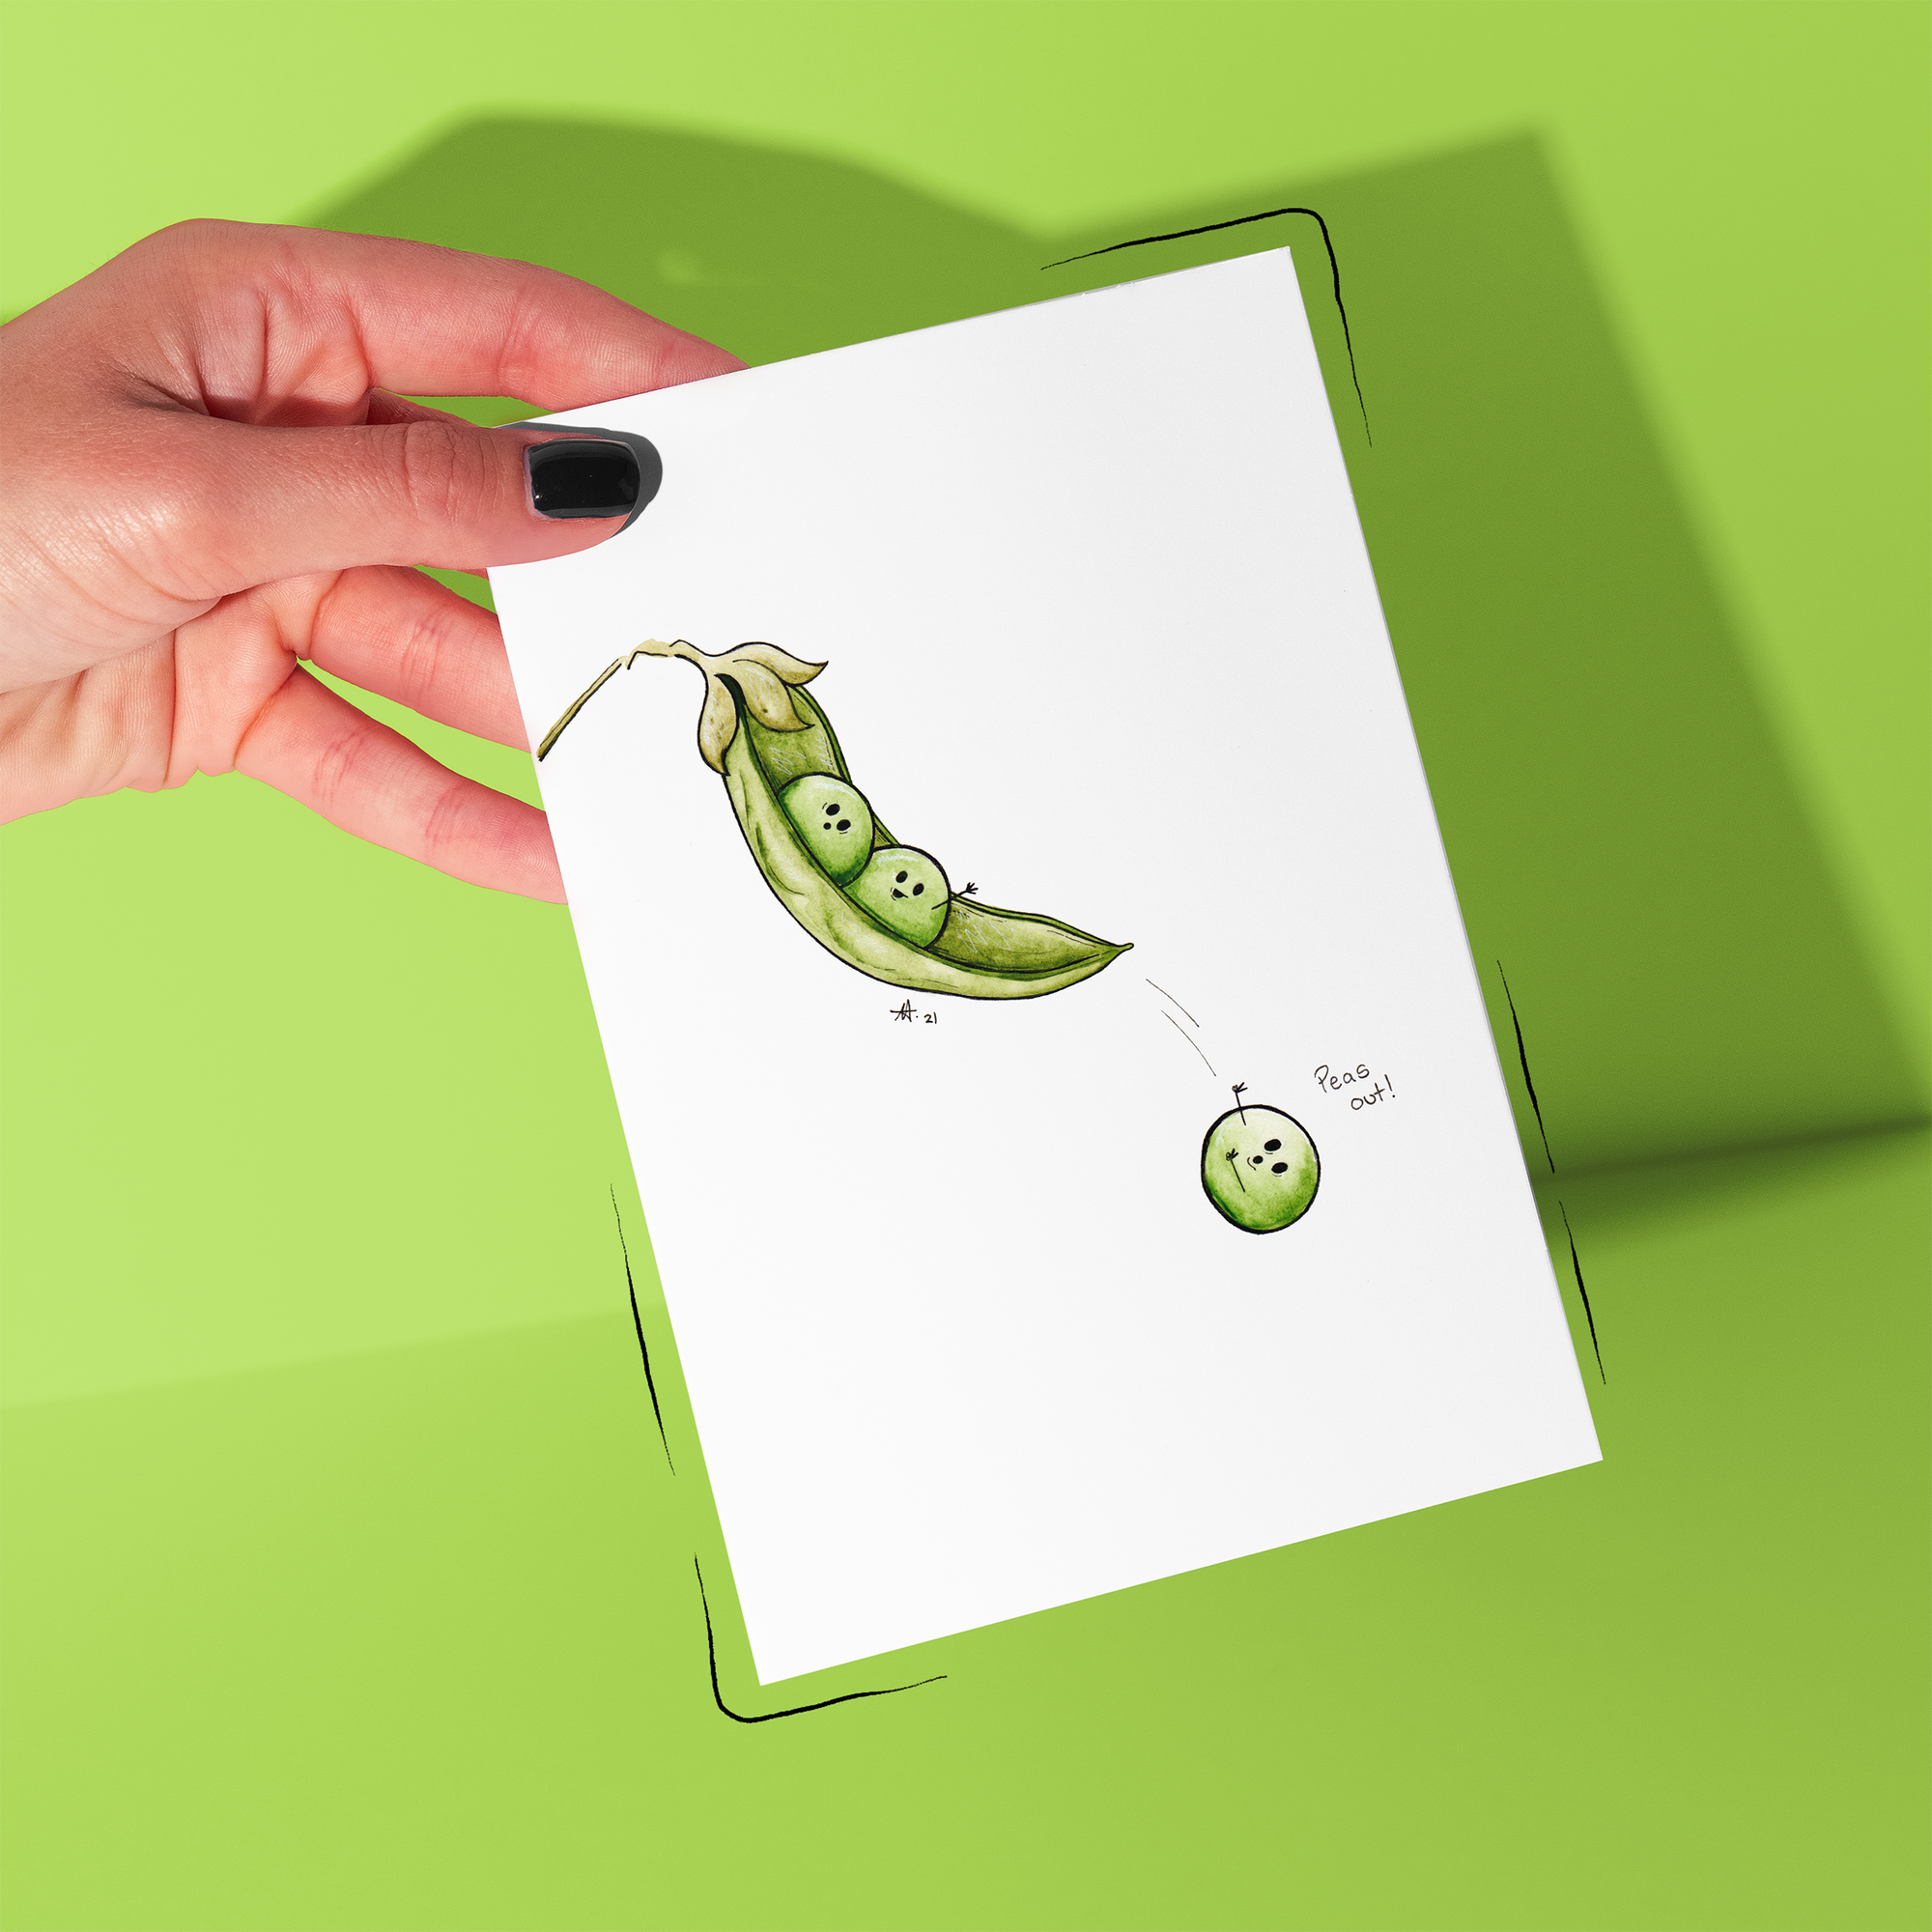 "Peas out!" - Greeting Card / Small Print